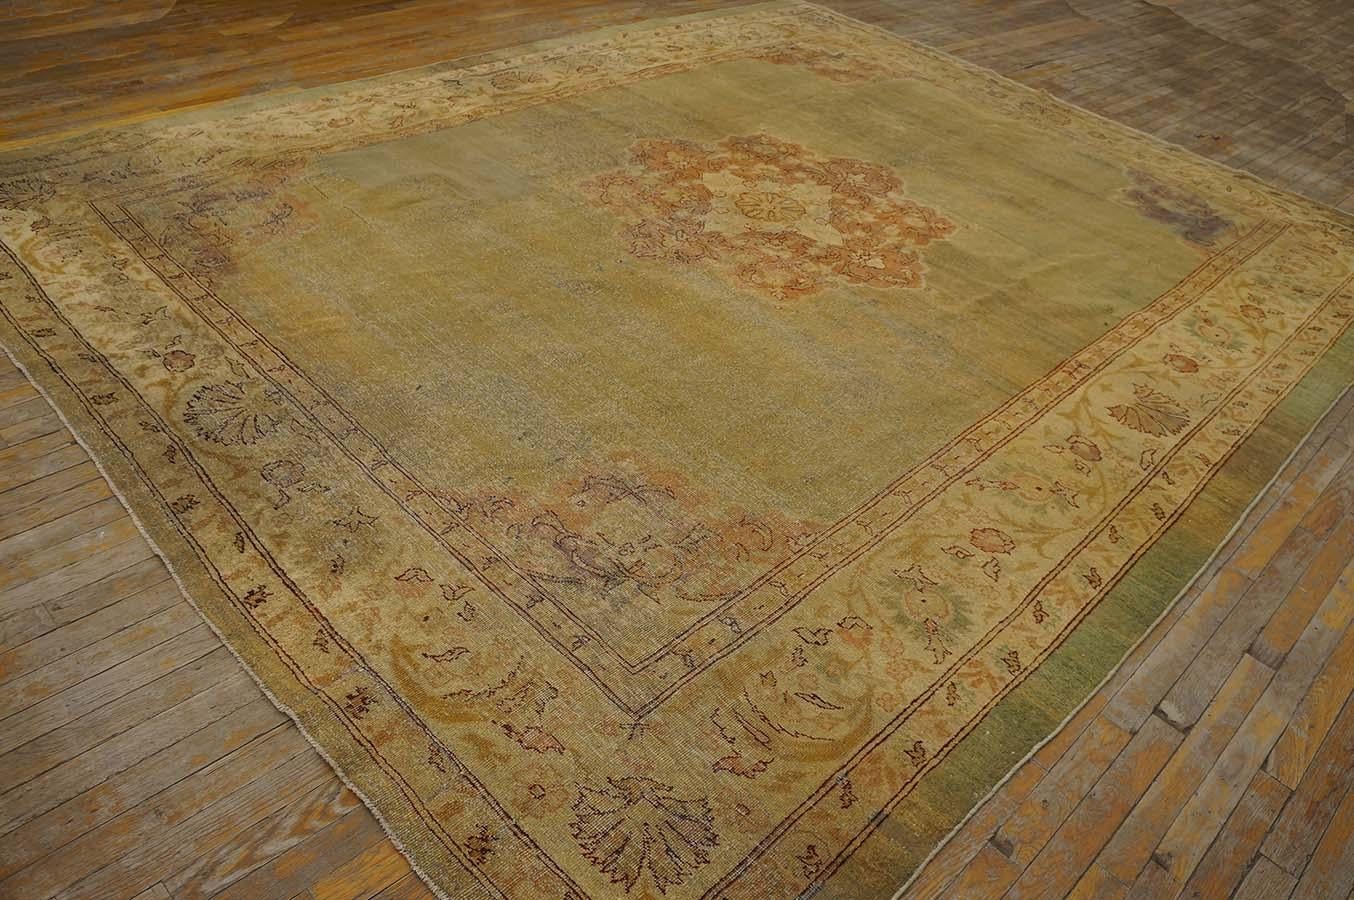 Antique Indian Amristar rug with Medallion on light green background
Early 20th Century N. Indian Amritsar Carpet ( 9'2